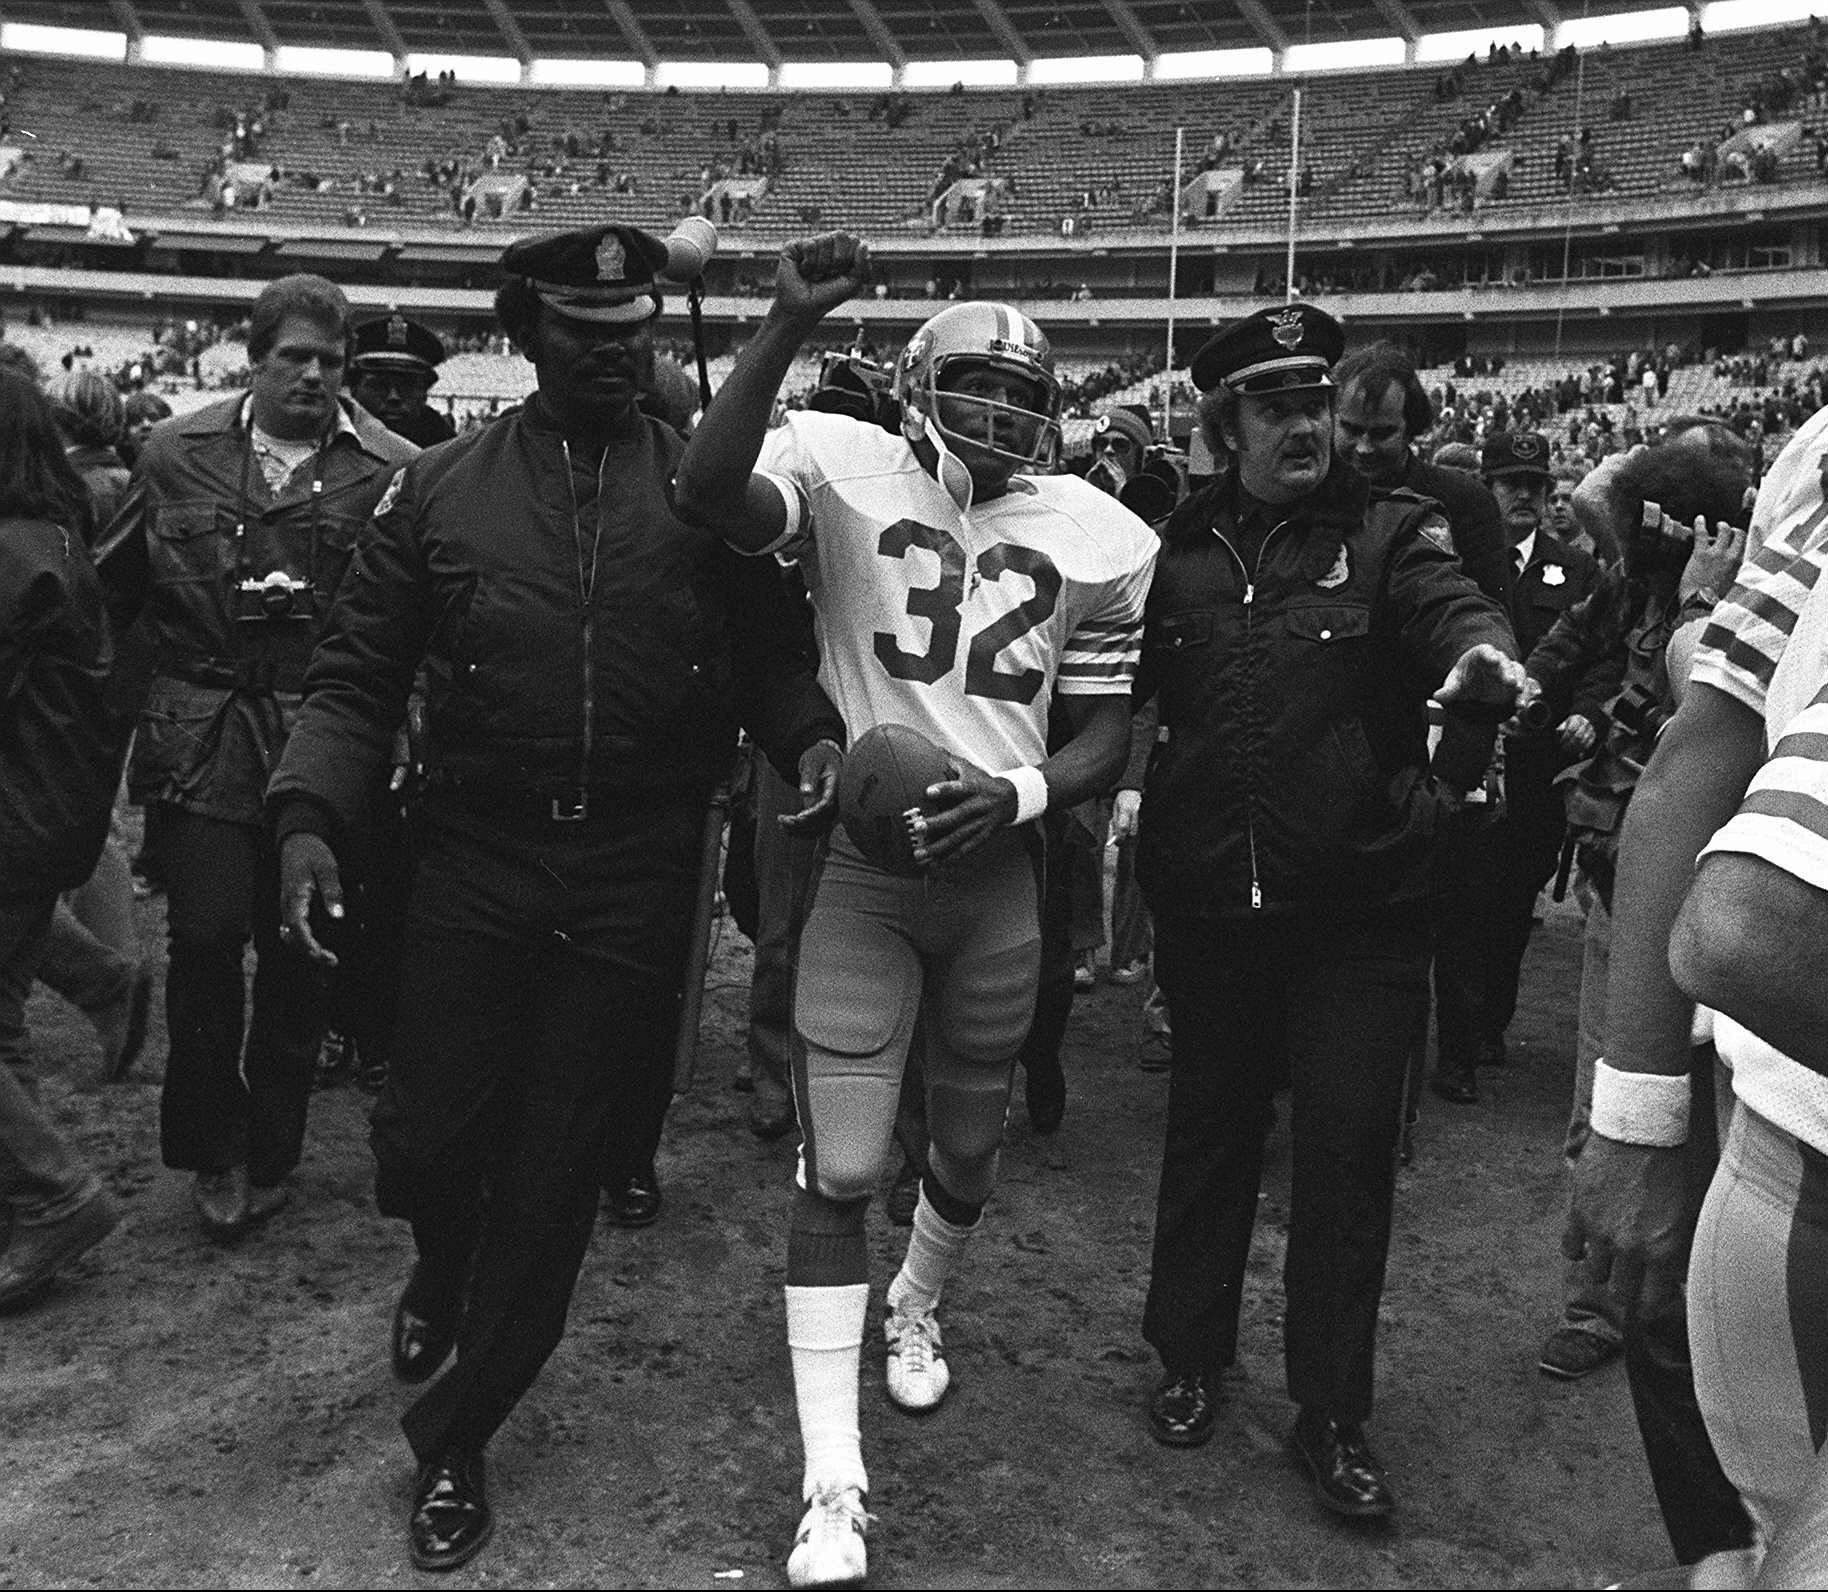 O.J. Simpson, playing for the San Francisco 49ers, walks off the field after his final NFL game in December 1979. 